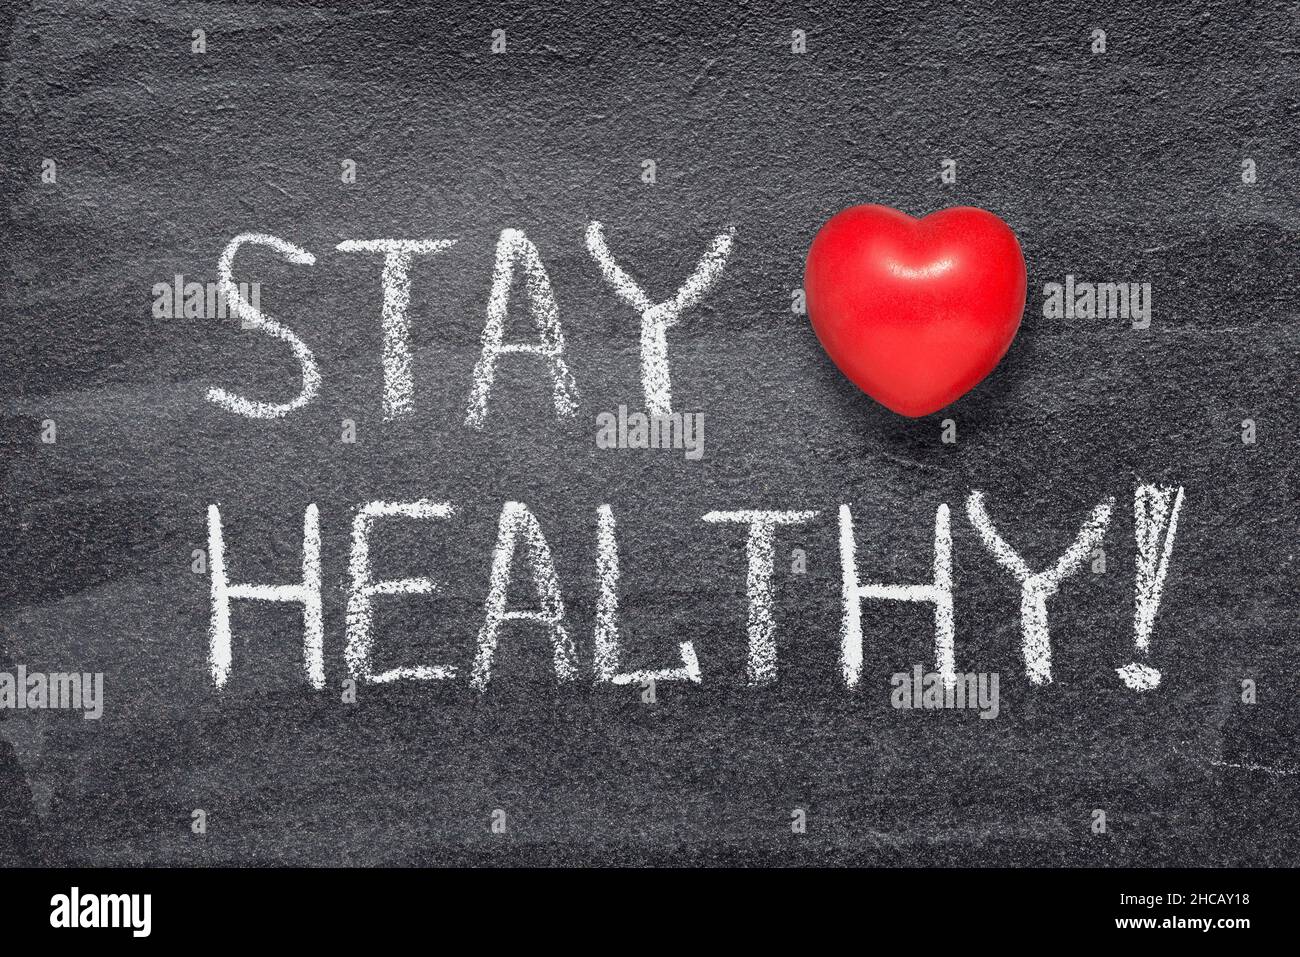 stay healthy phrase written on chalkboard with red heart symbol Stock Photo